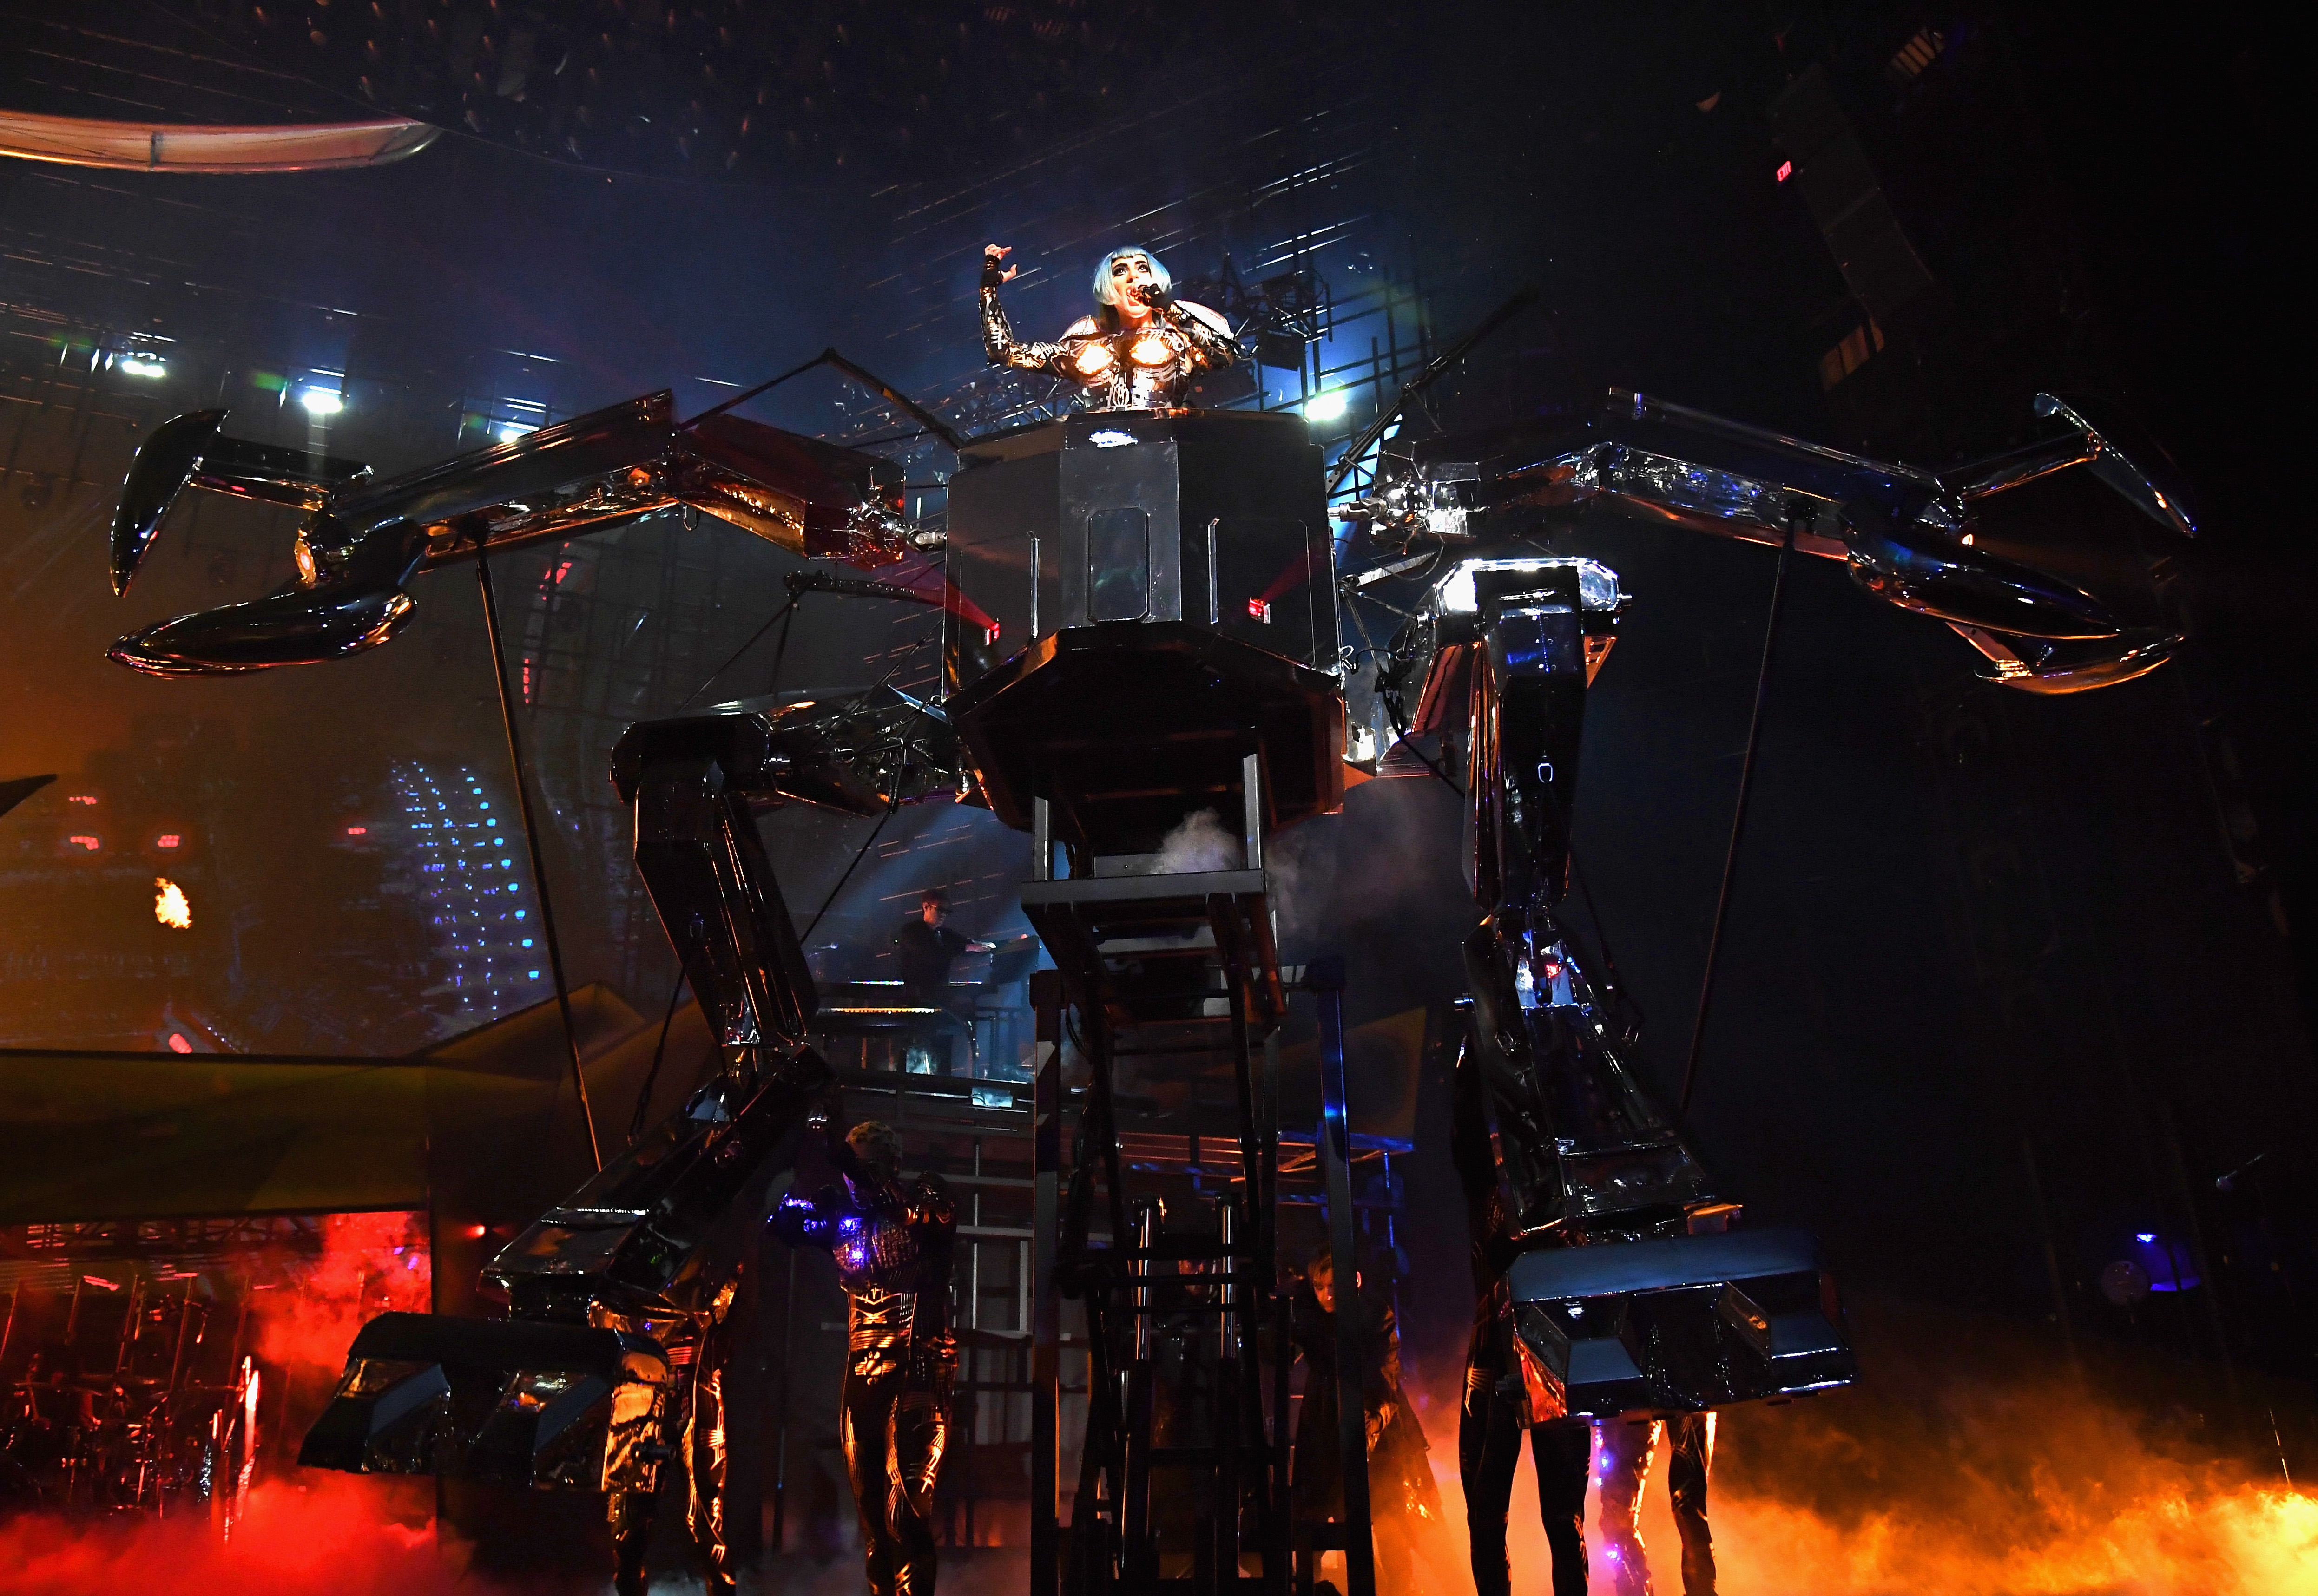 Lady Gaga Just Performed On Top Of A Ginormous Robot & That’s Us Done